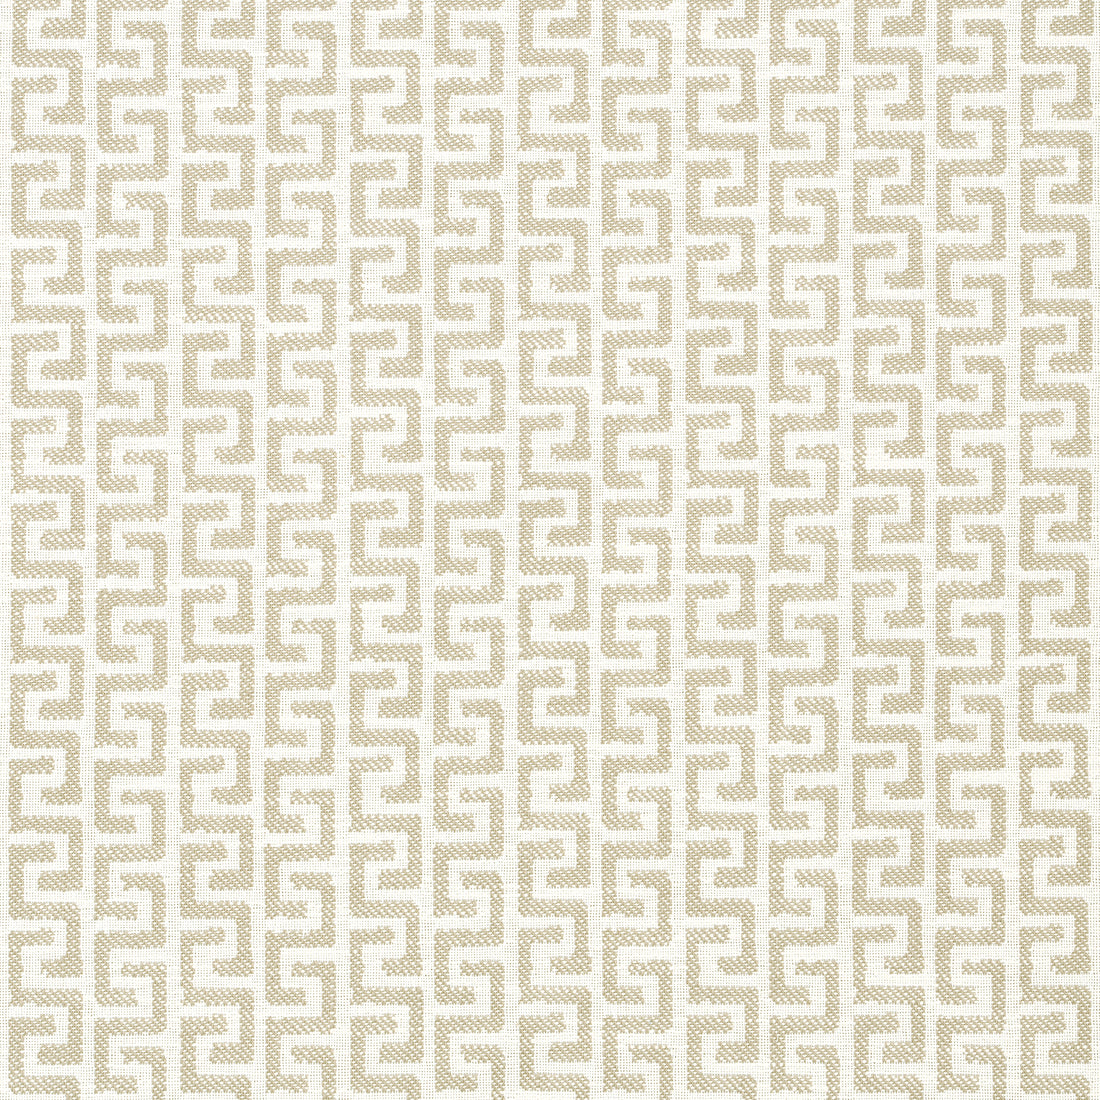 Merritt fabric in flax color - pattern number W74256 - by Thibaut in the Passage collection